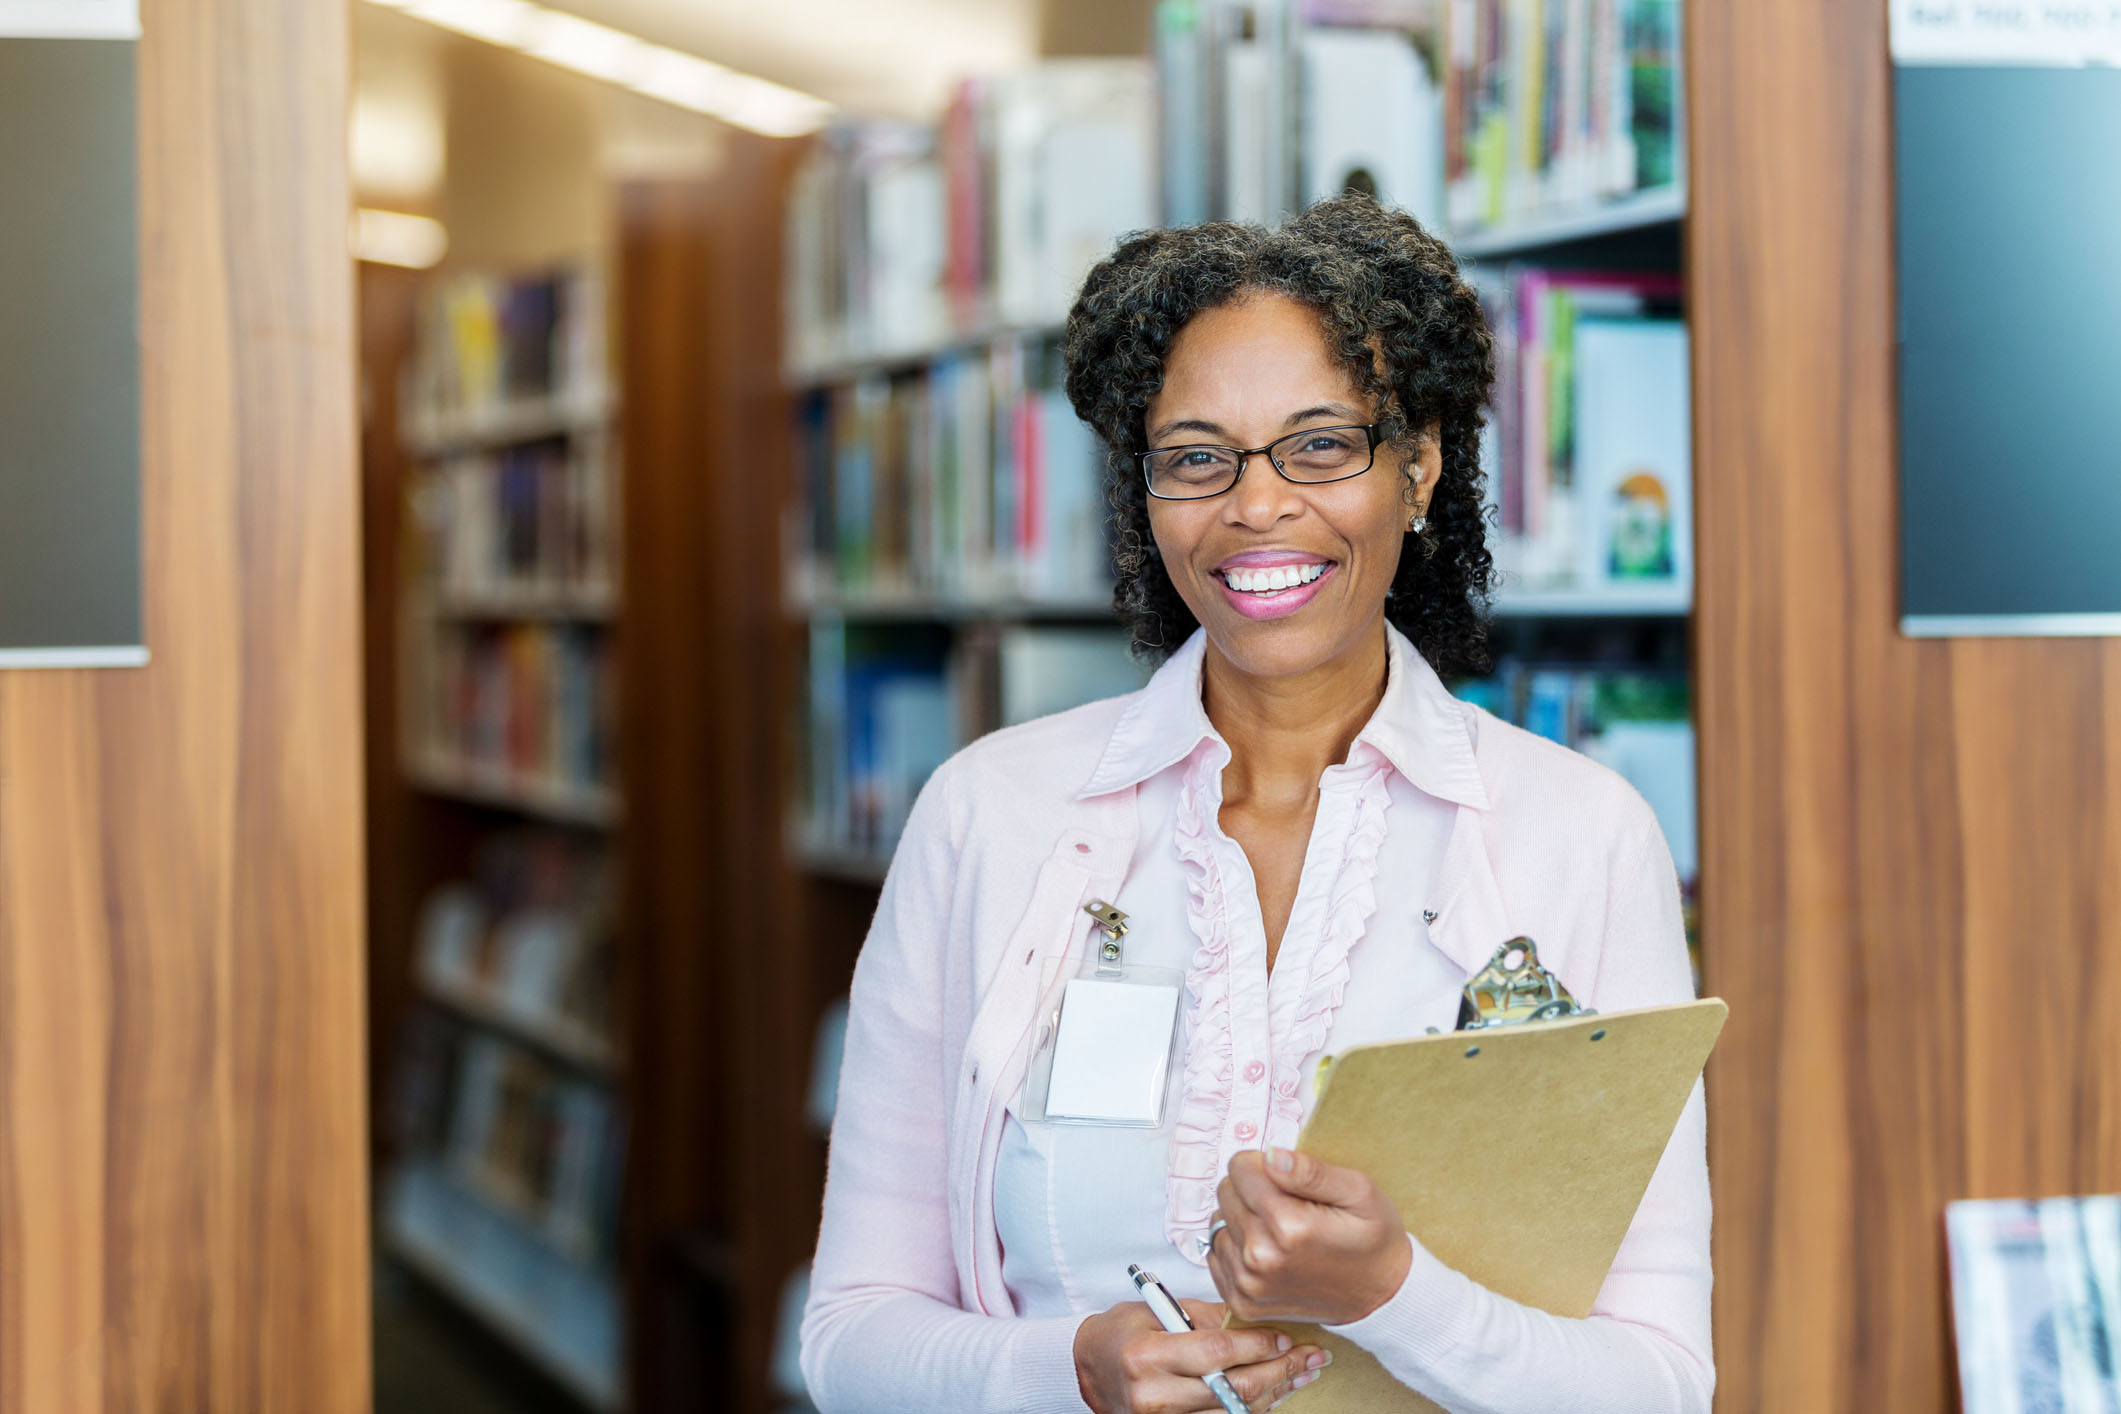 A cheerful mature female school library volunteer smiles for the camera. She is standing in front of a book shelf holding a clipboard and pen and wearing a nametag.